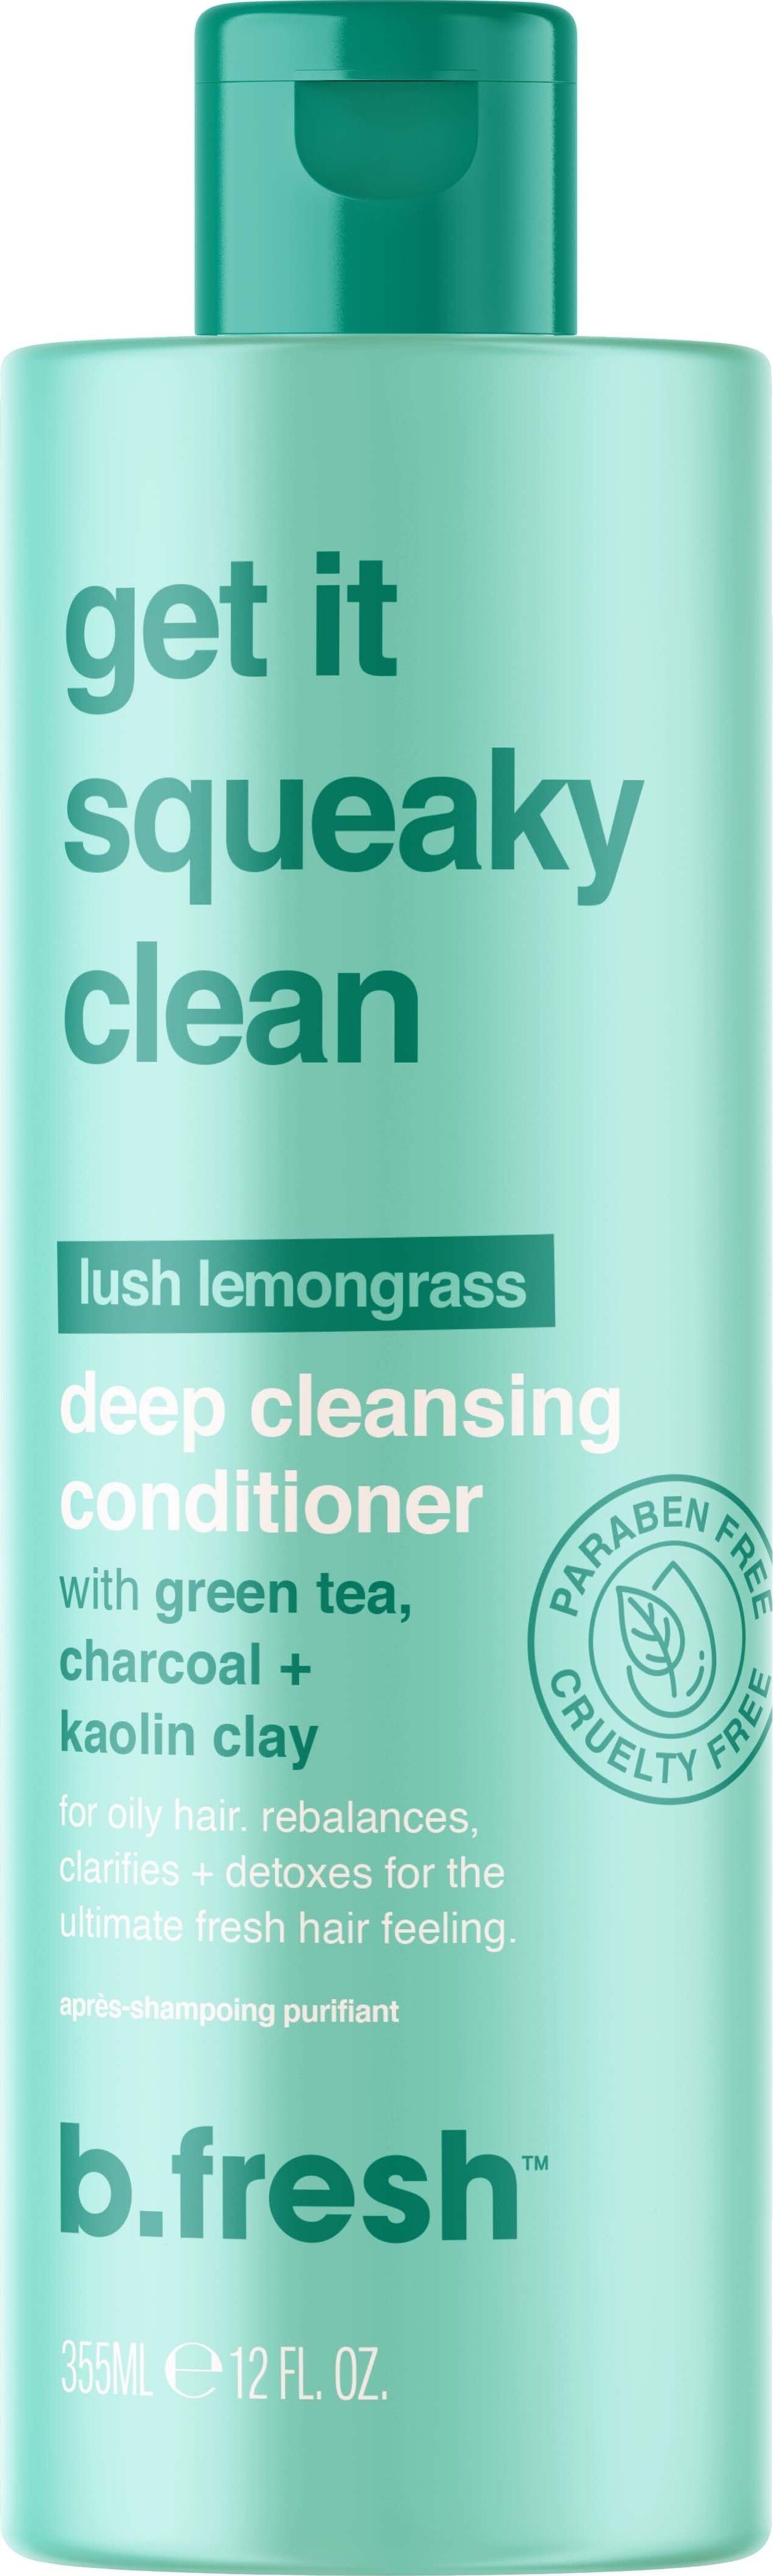 B.fresh - Get It Squeaky Clean Deep Cleansing Conditioner 355 Ml